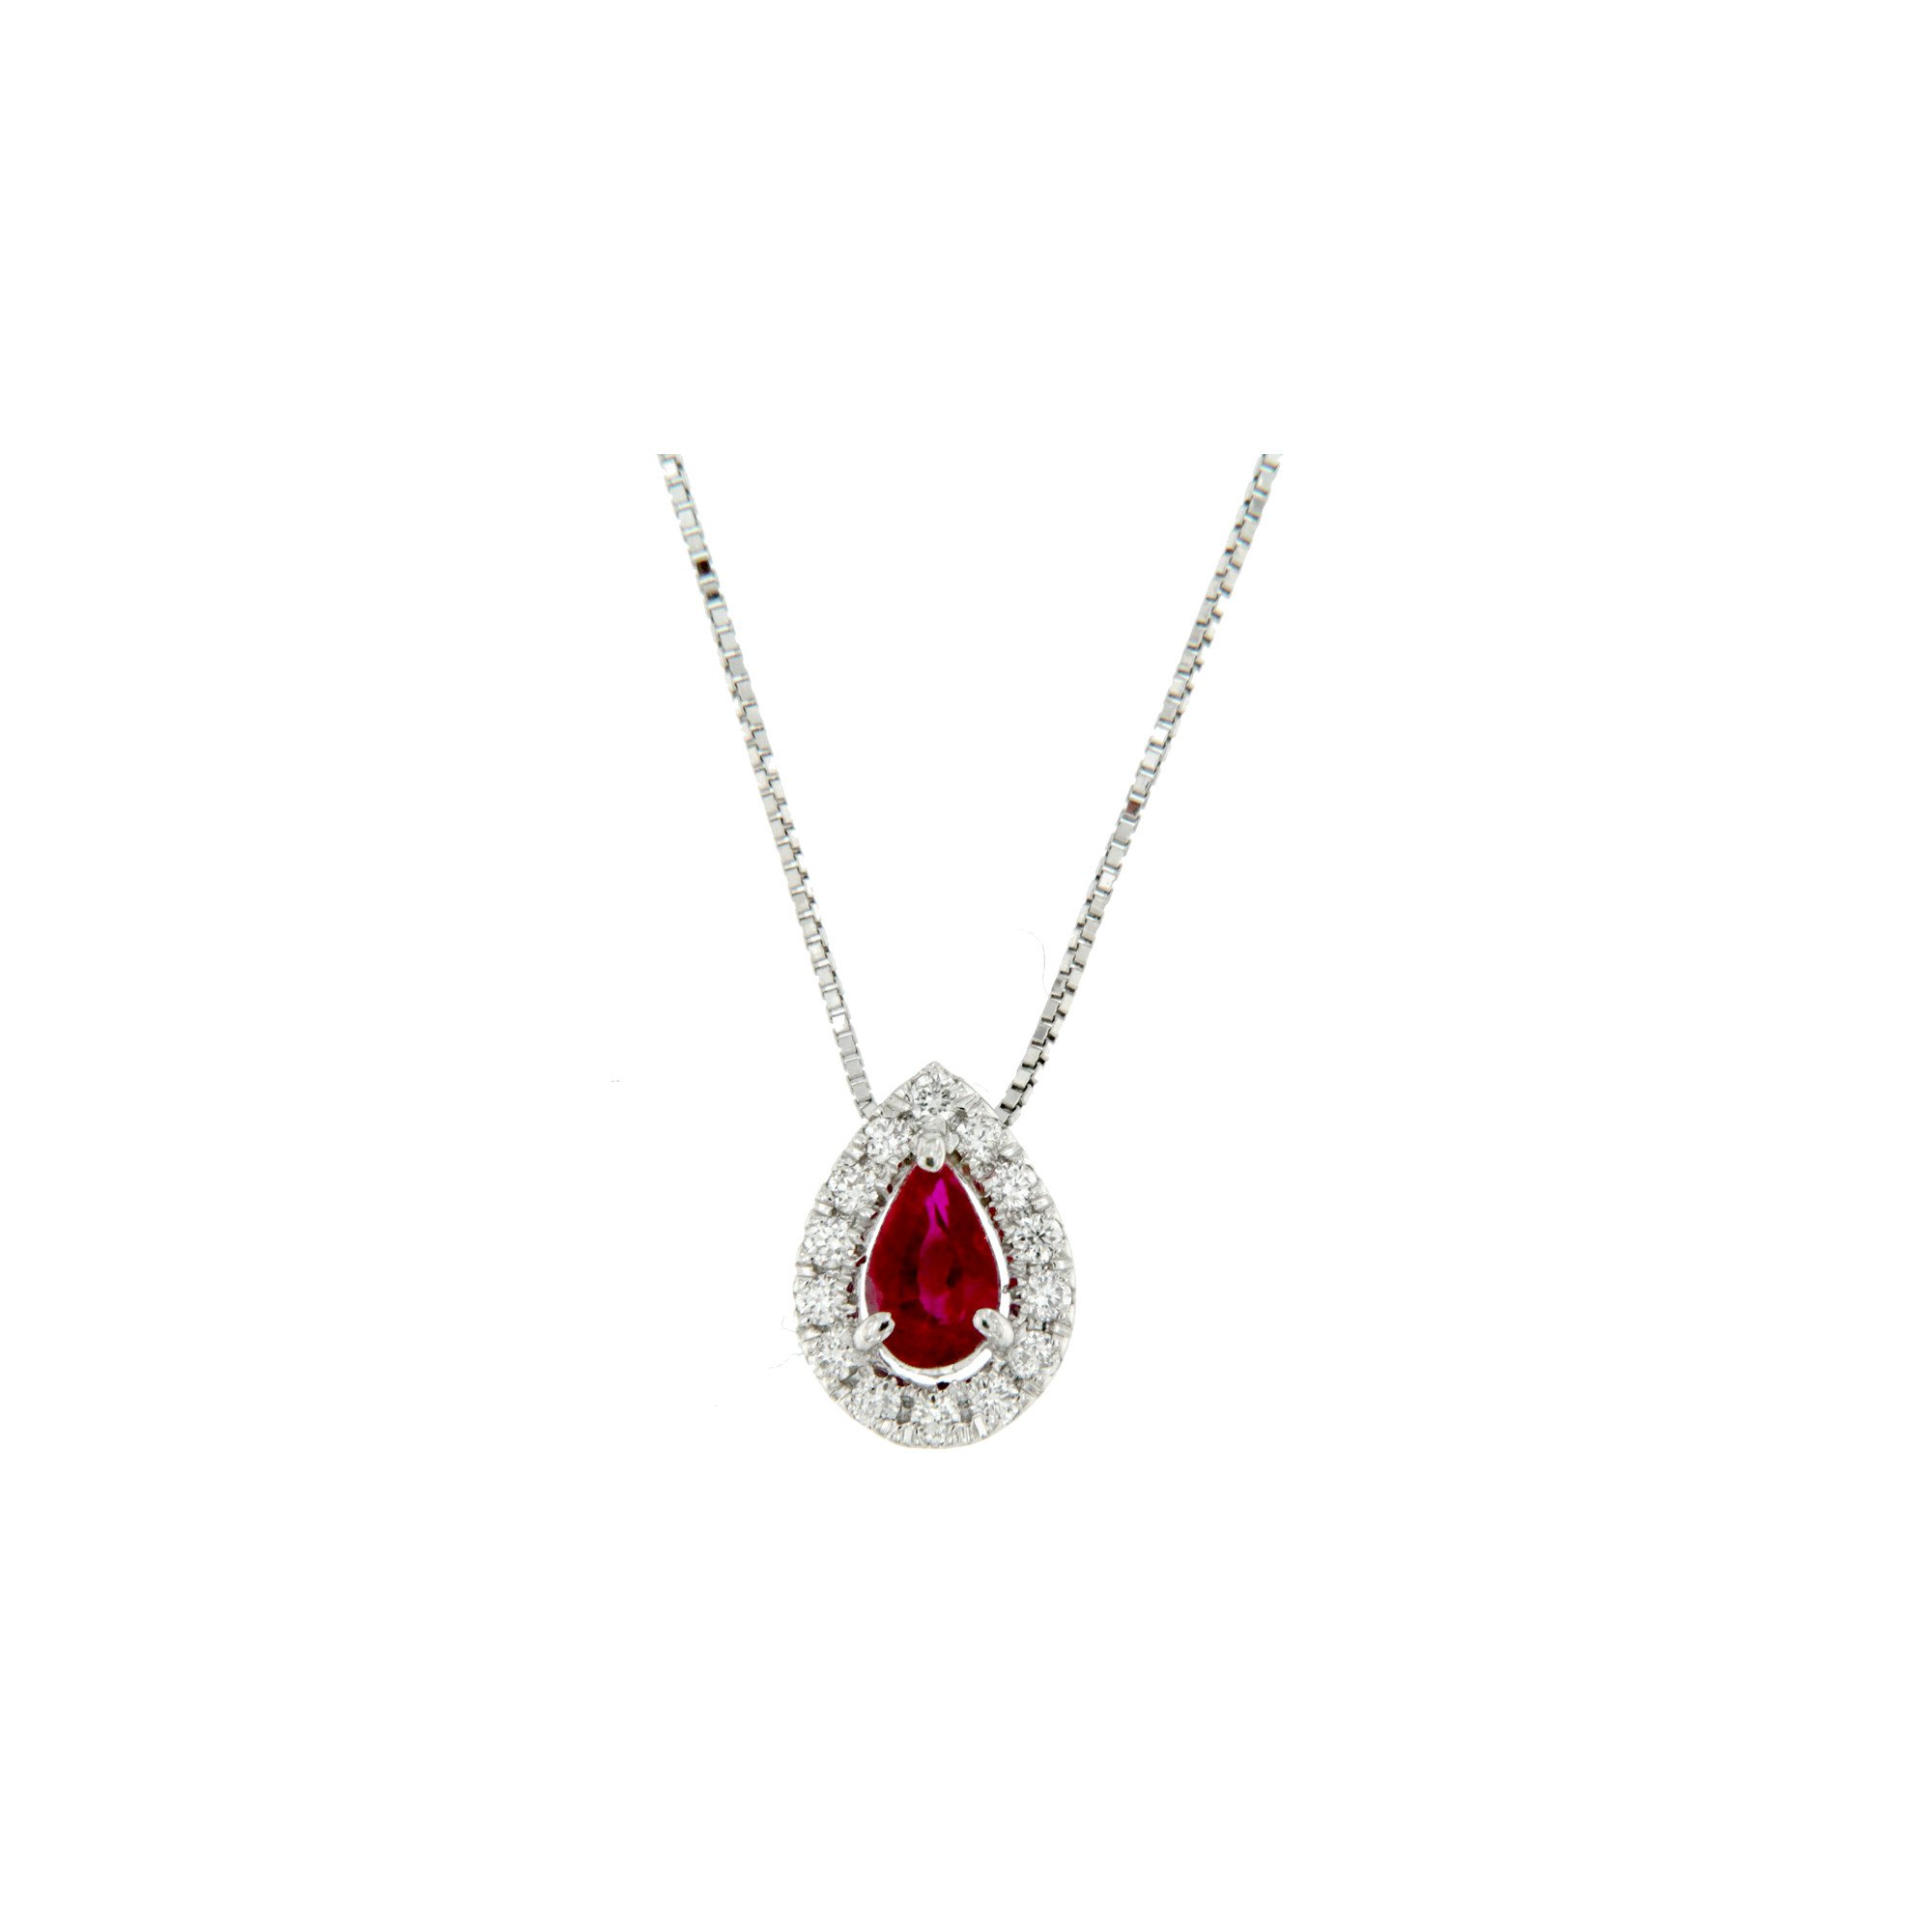 ruby necklace Necklace with diamond and ruby pendant - Fecarotta Gioielli